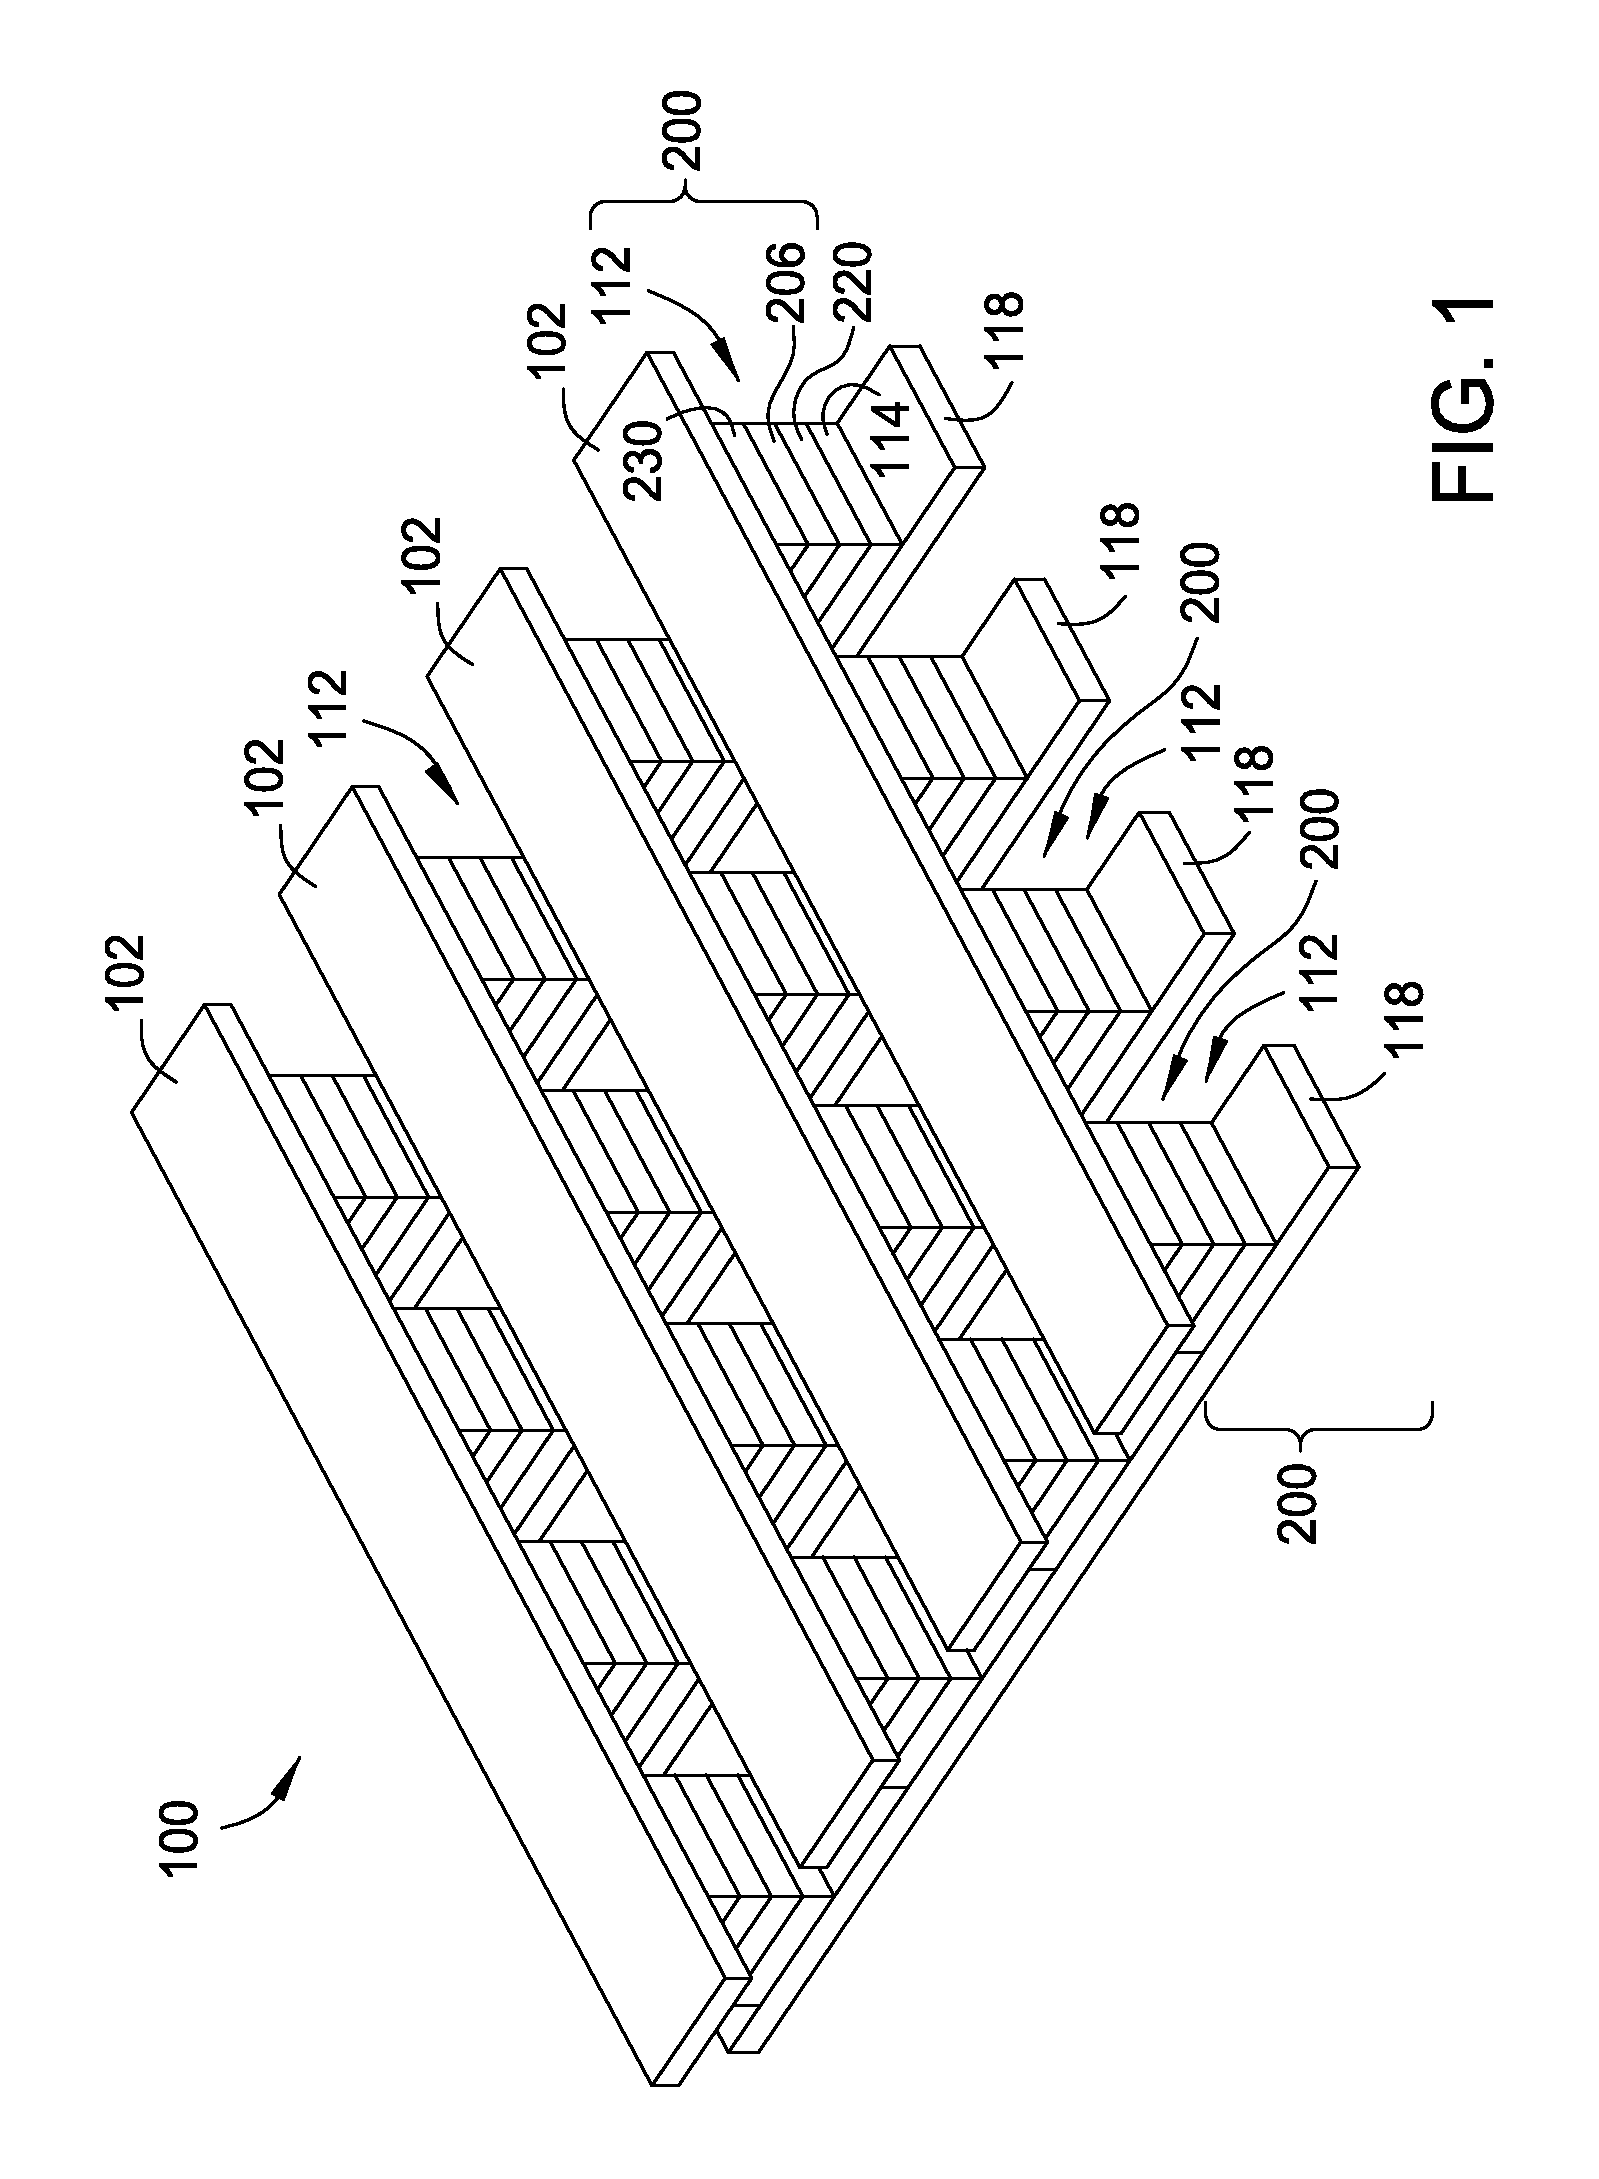 Current-limiting layer and a current-reducing layer in a memory device